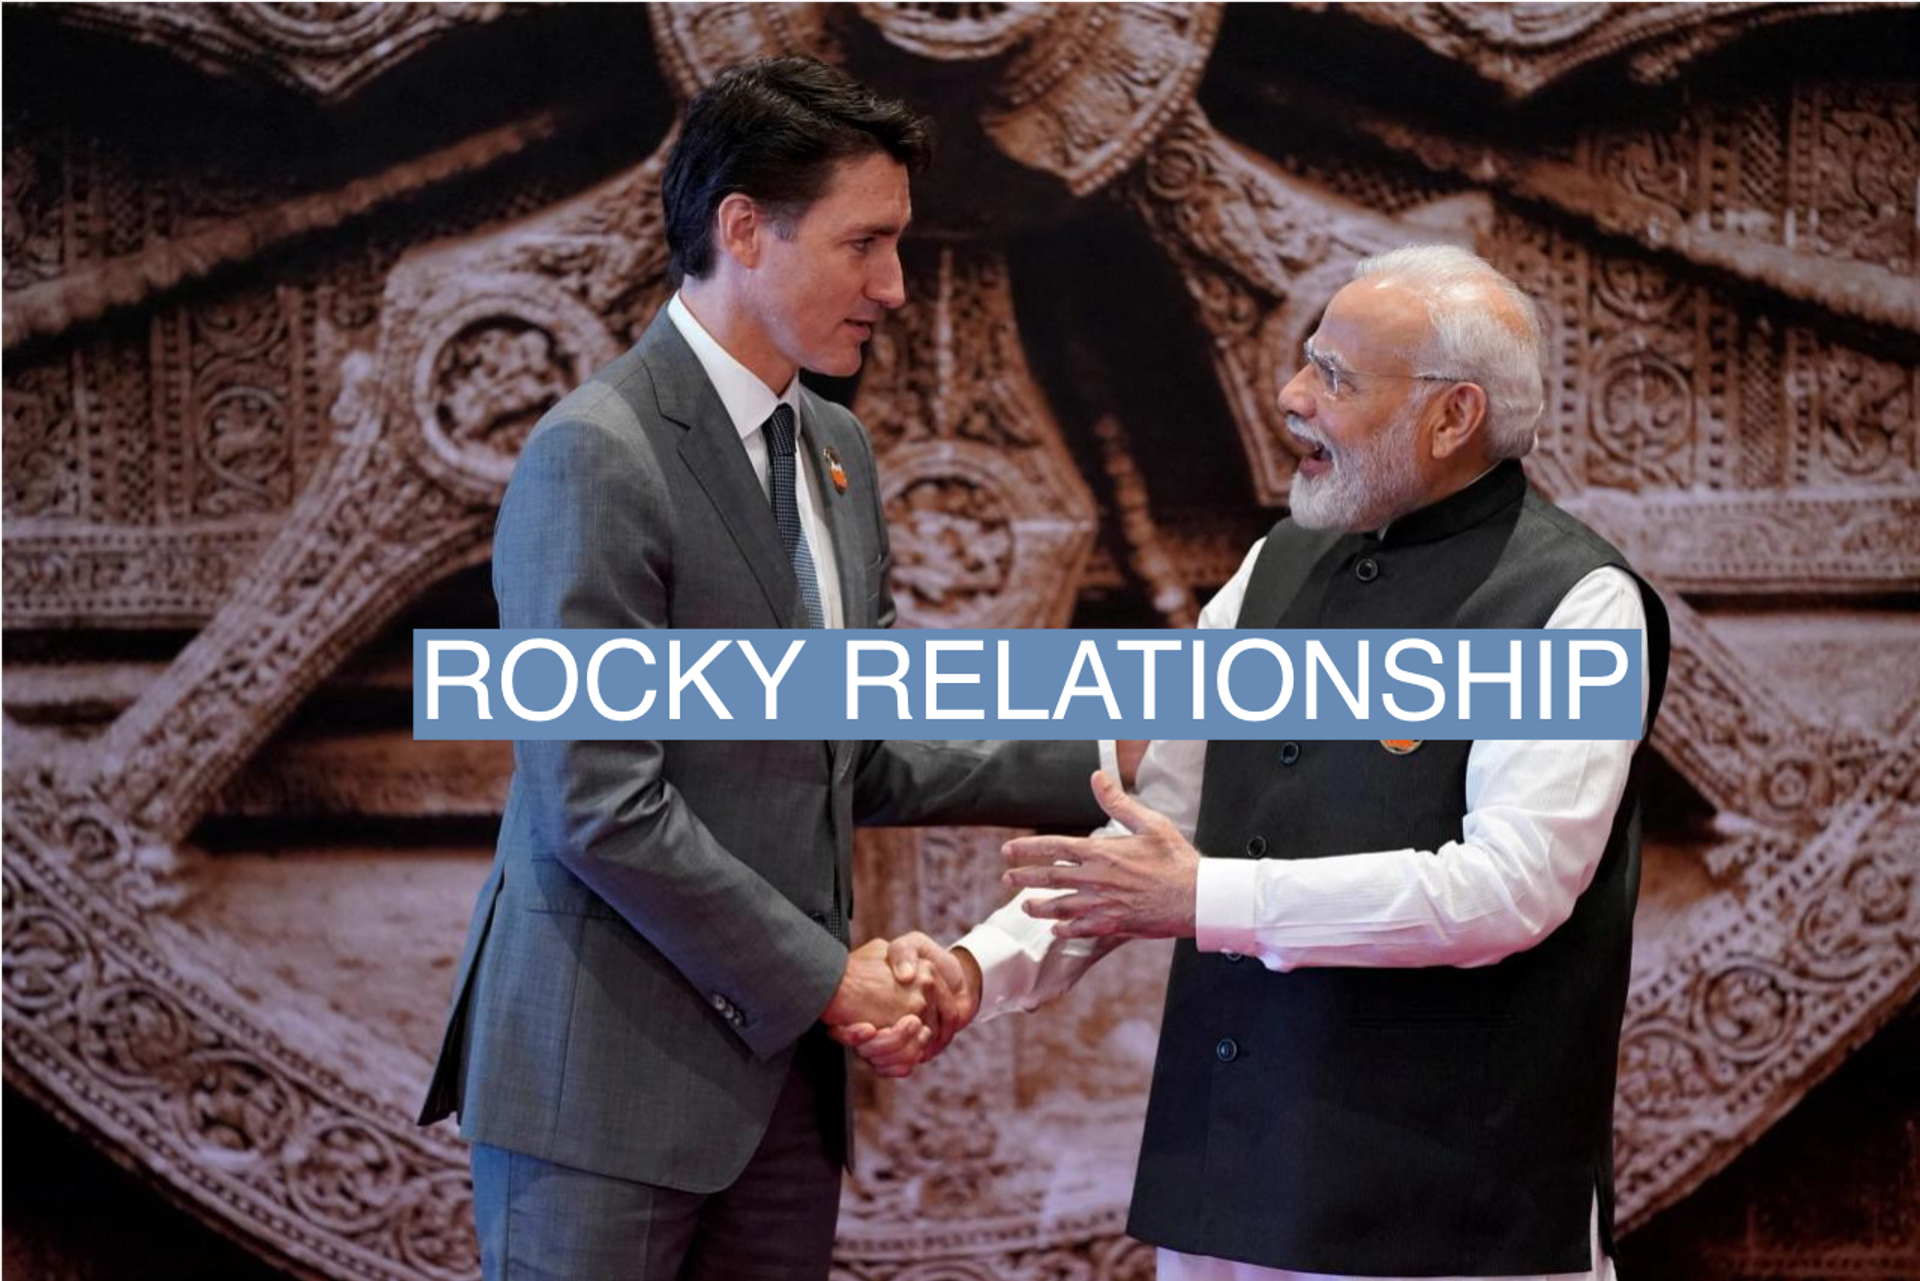 Indian Prime Minister Narendra Modi welcomes Canada Prime Minister Justin Trudeau to the G20.